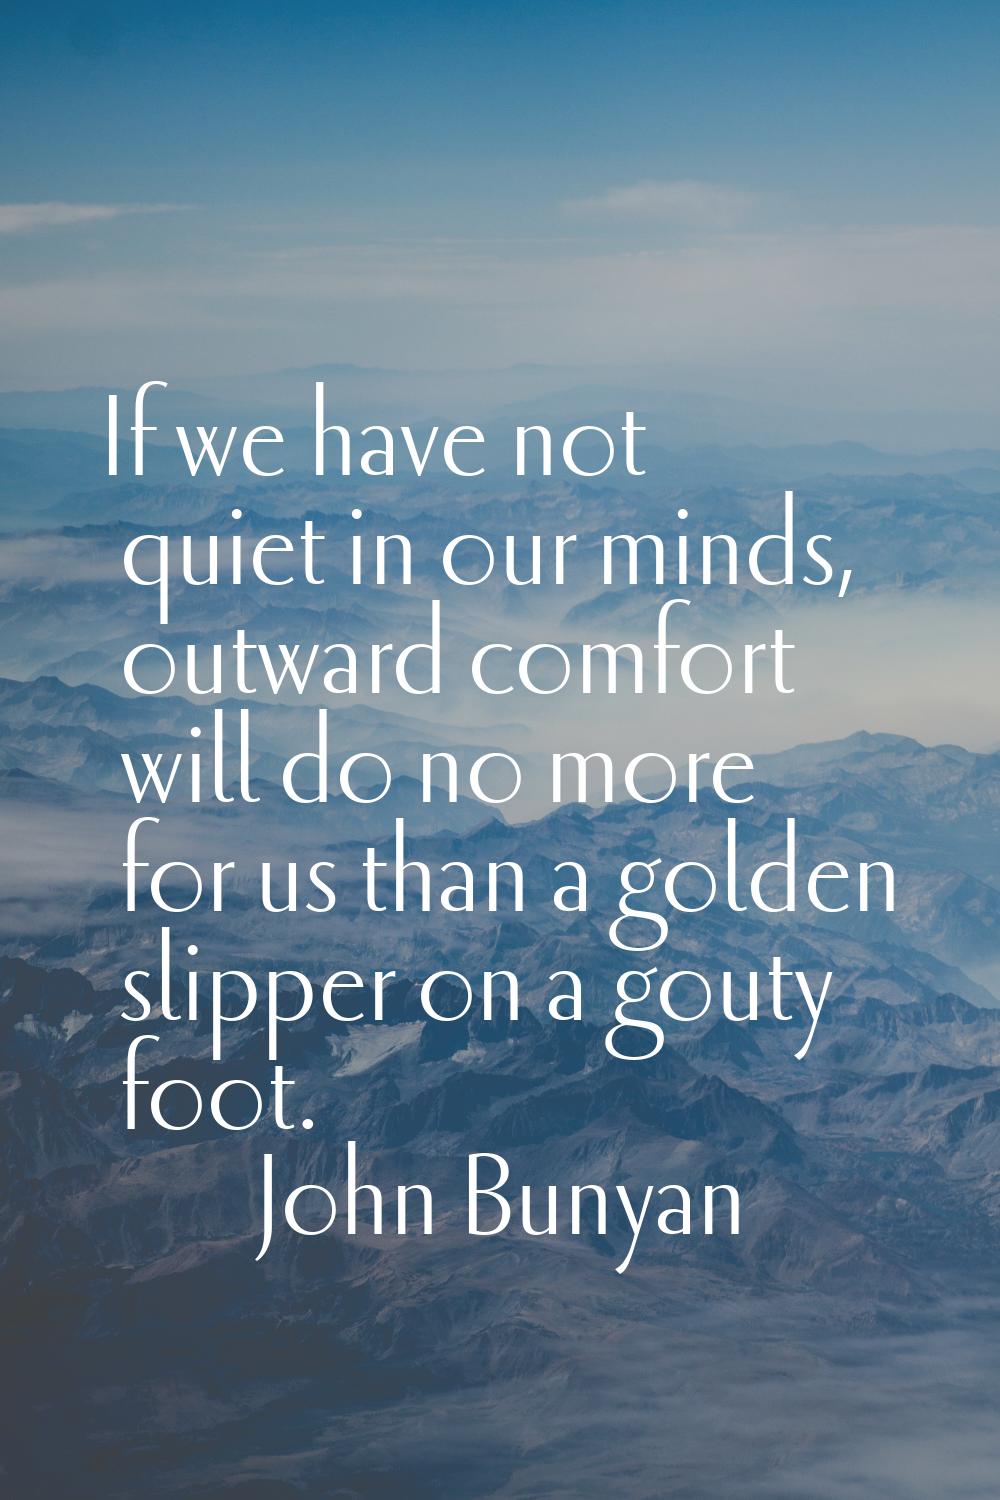 If we have not quiet in our minds, outward comfort will do no more for us than a golden slipper on 